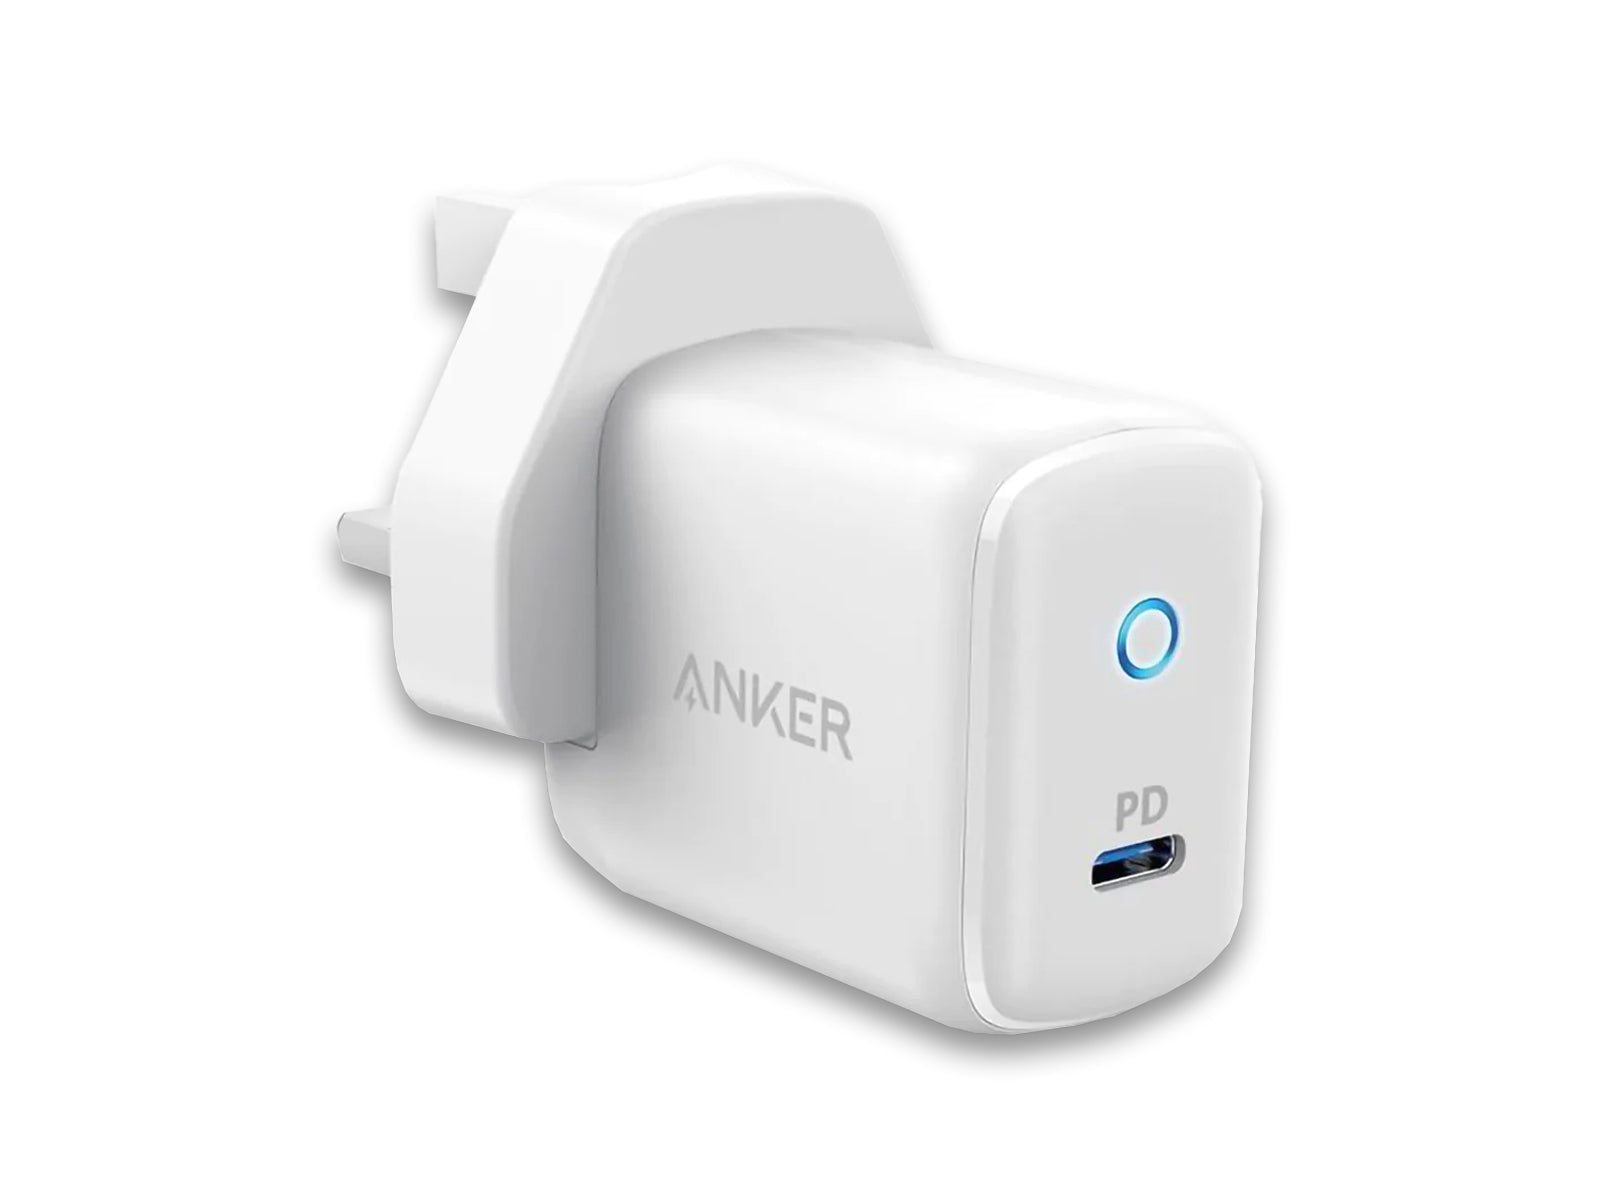 Anker PowerPort PD USB-C 18W Fast Charger